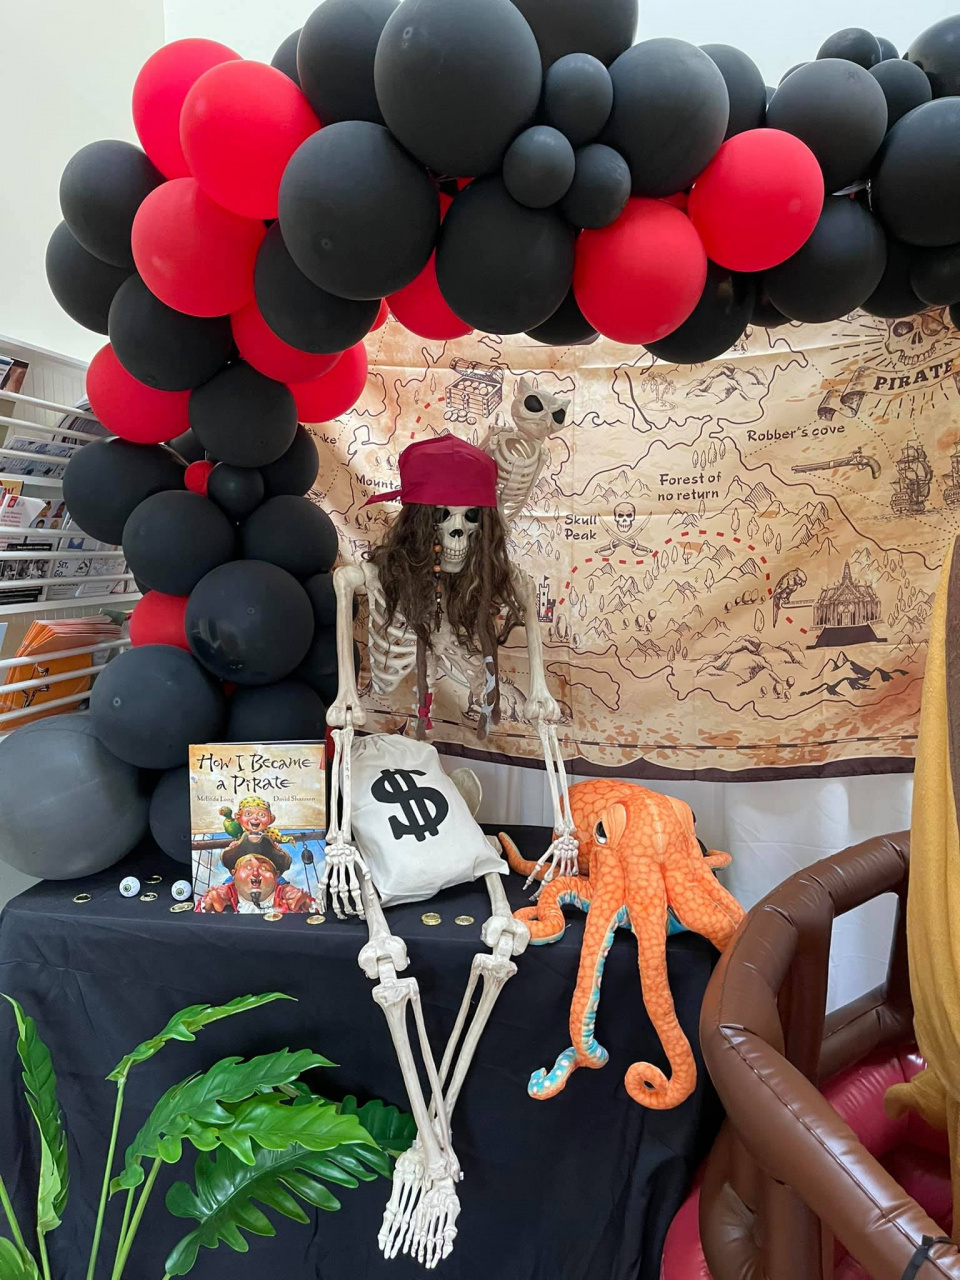 Pirate-Themed School Decorations for Halloween.